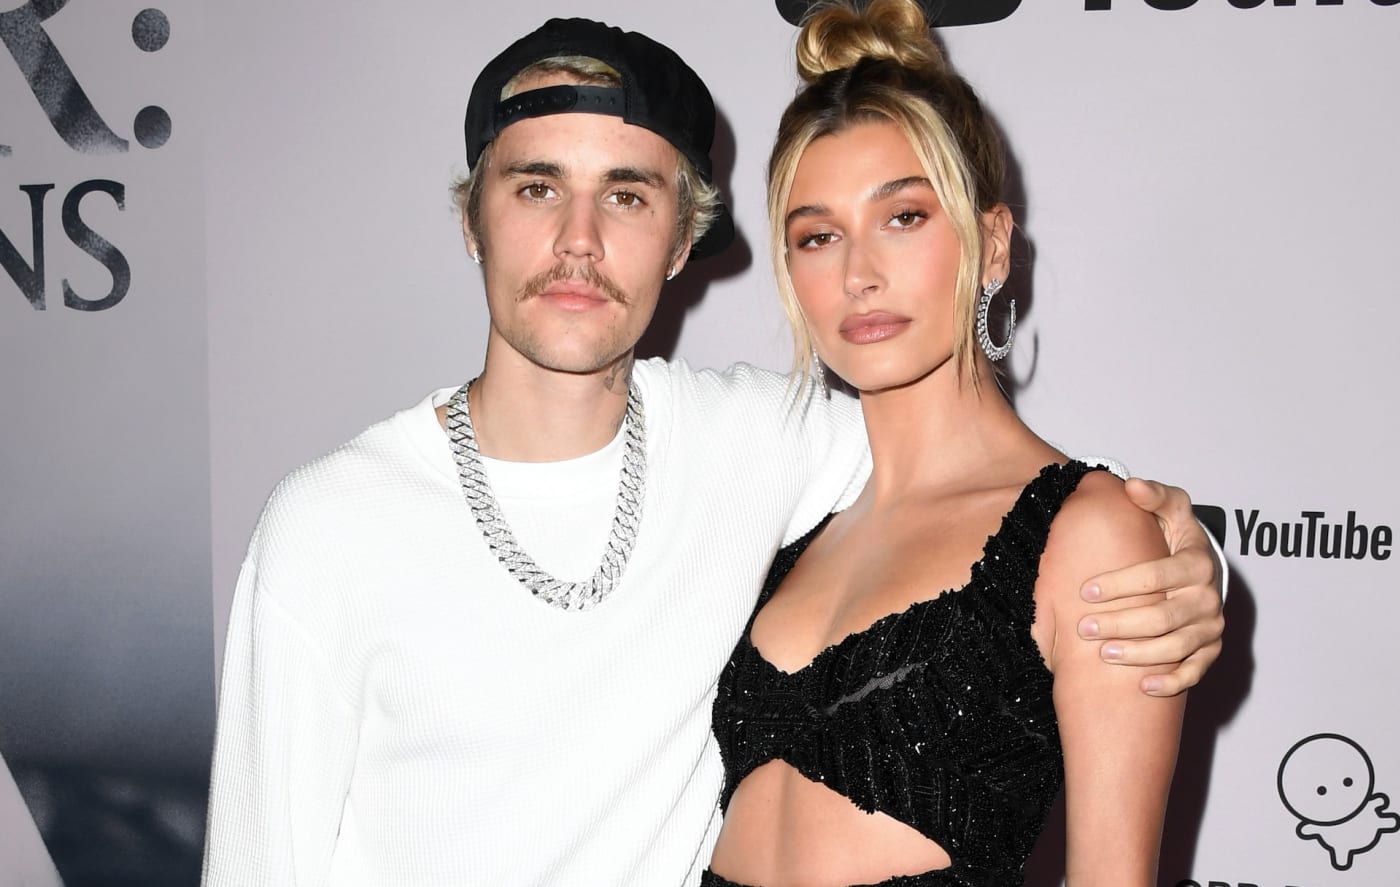 From Belieber to Bieber: A Full Timeline of Justin and Hailey Bieber’s Relationship